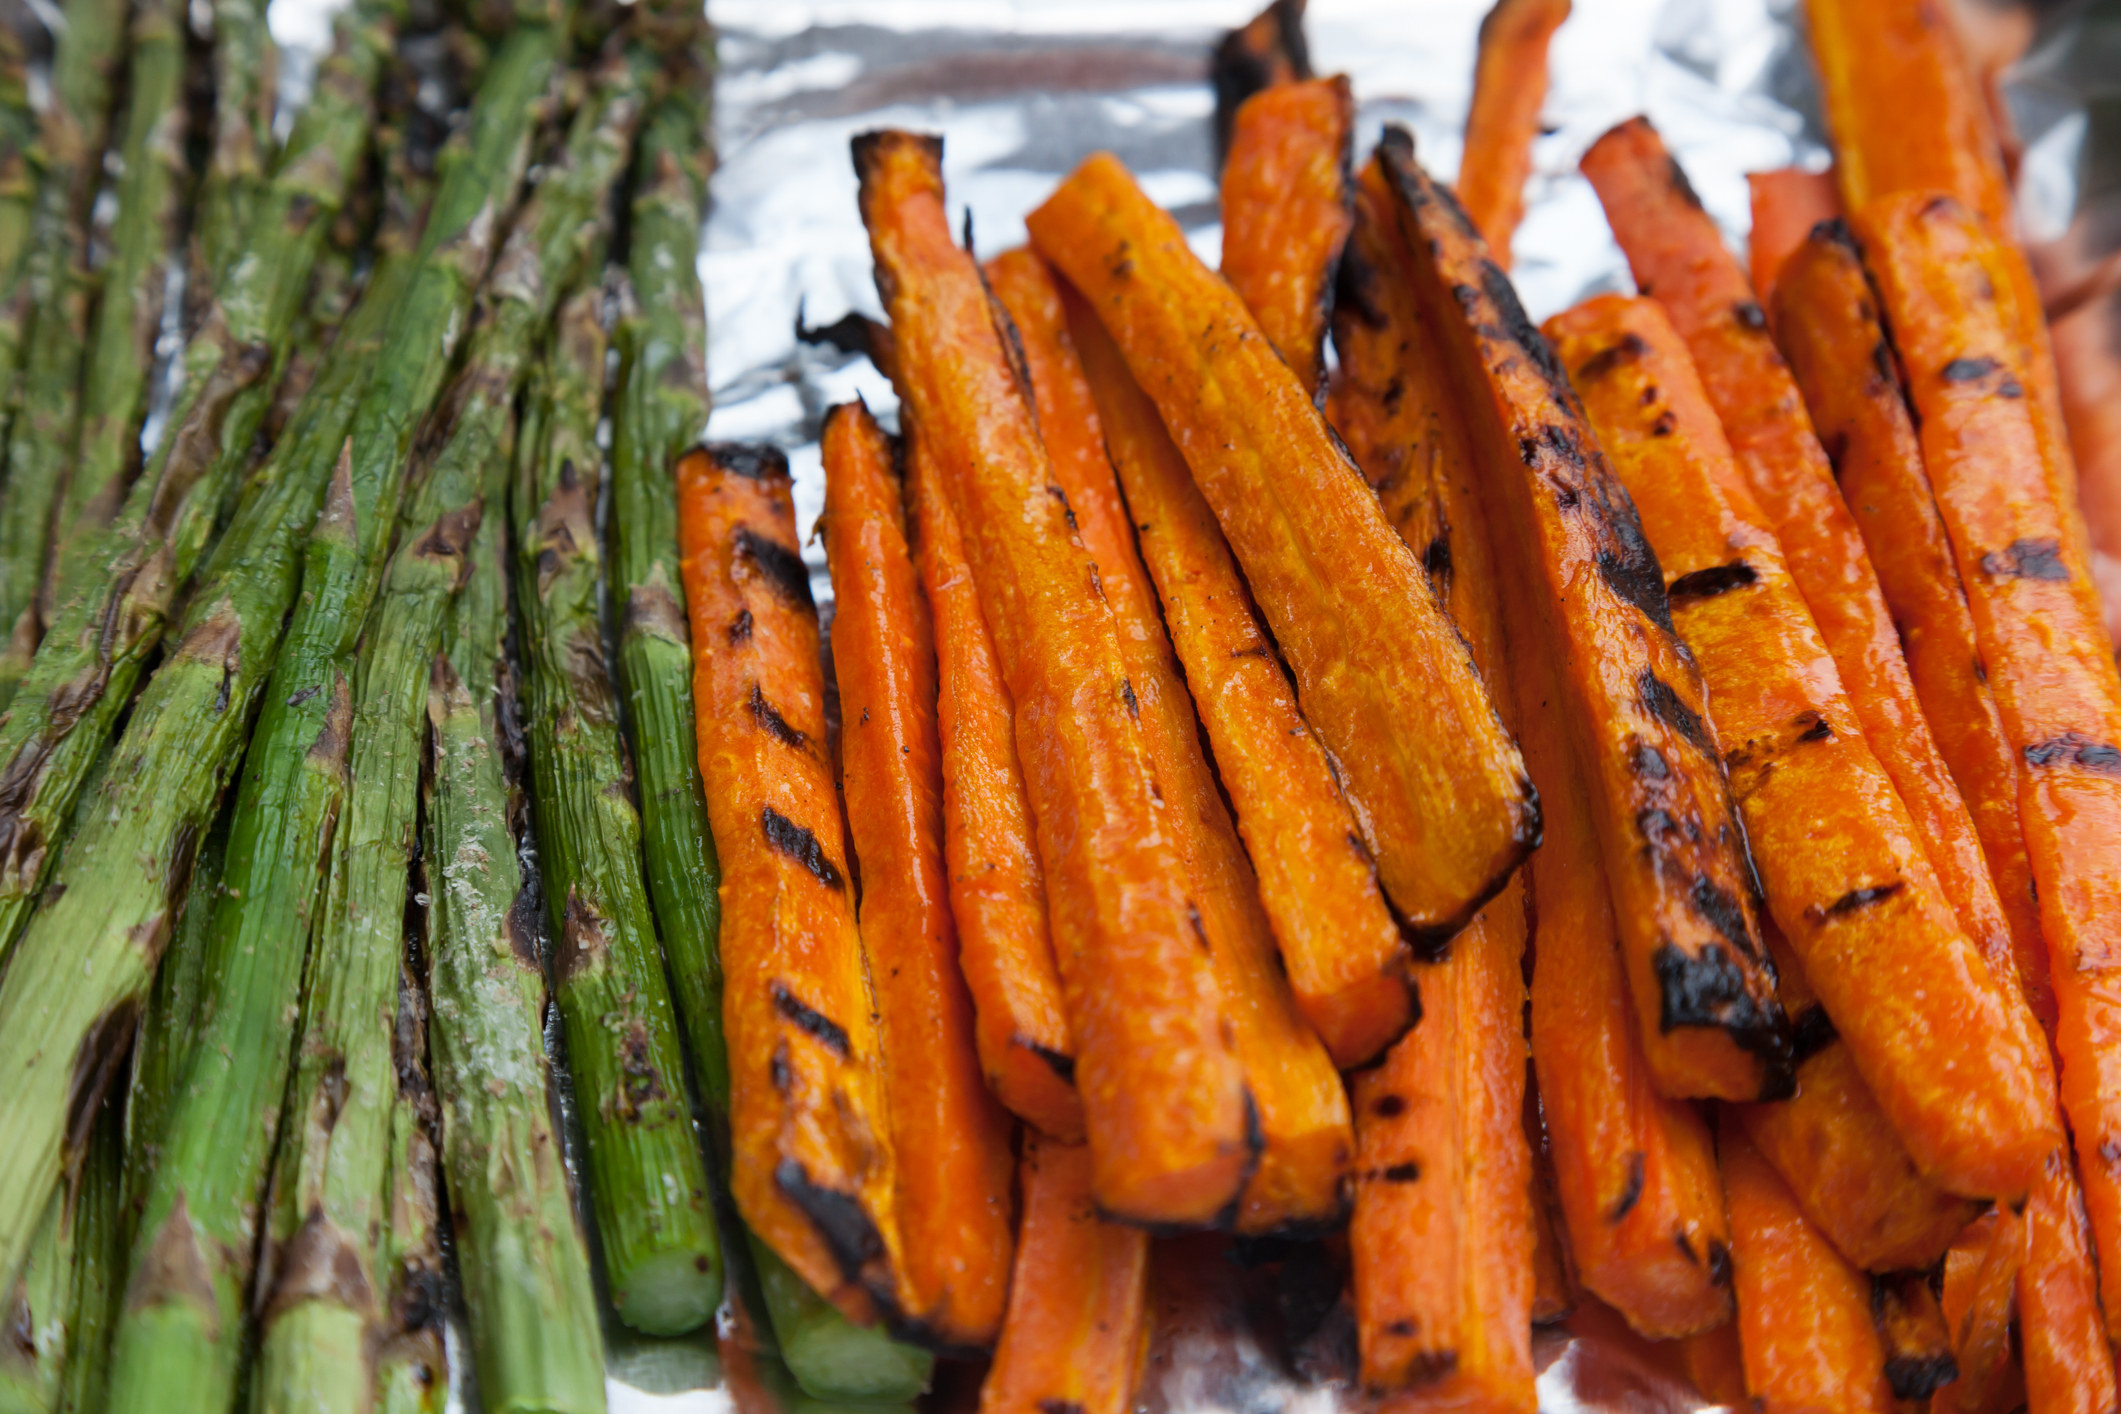 Freshly grilled carrots and asparagus sit on foil.